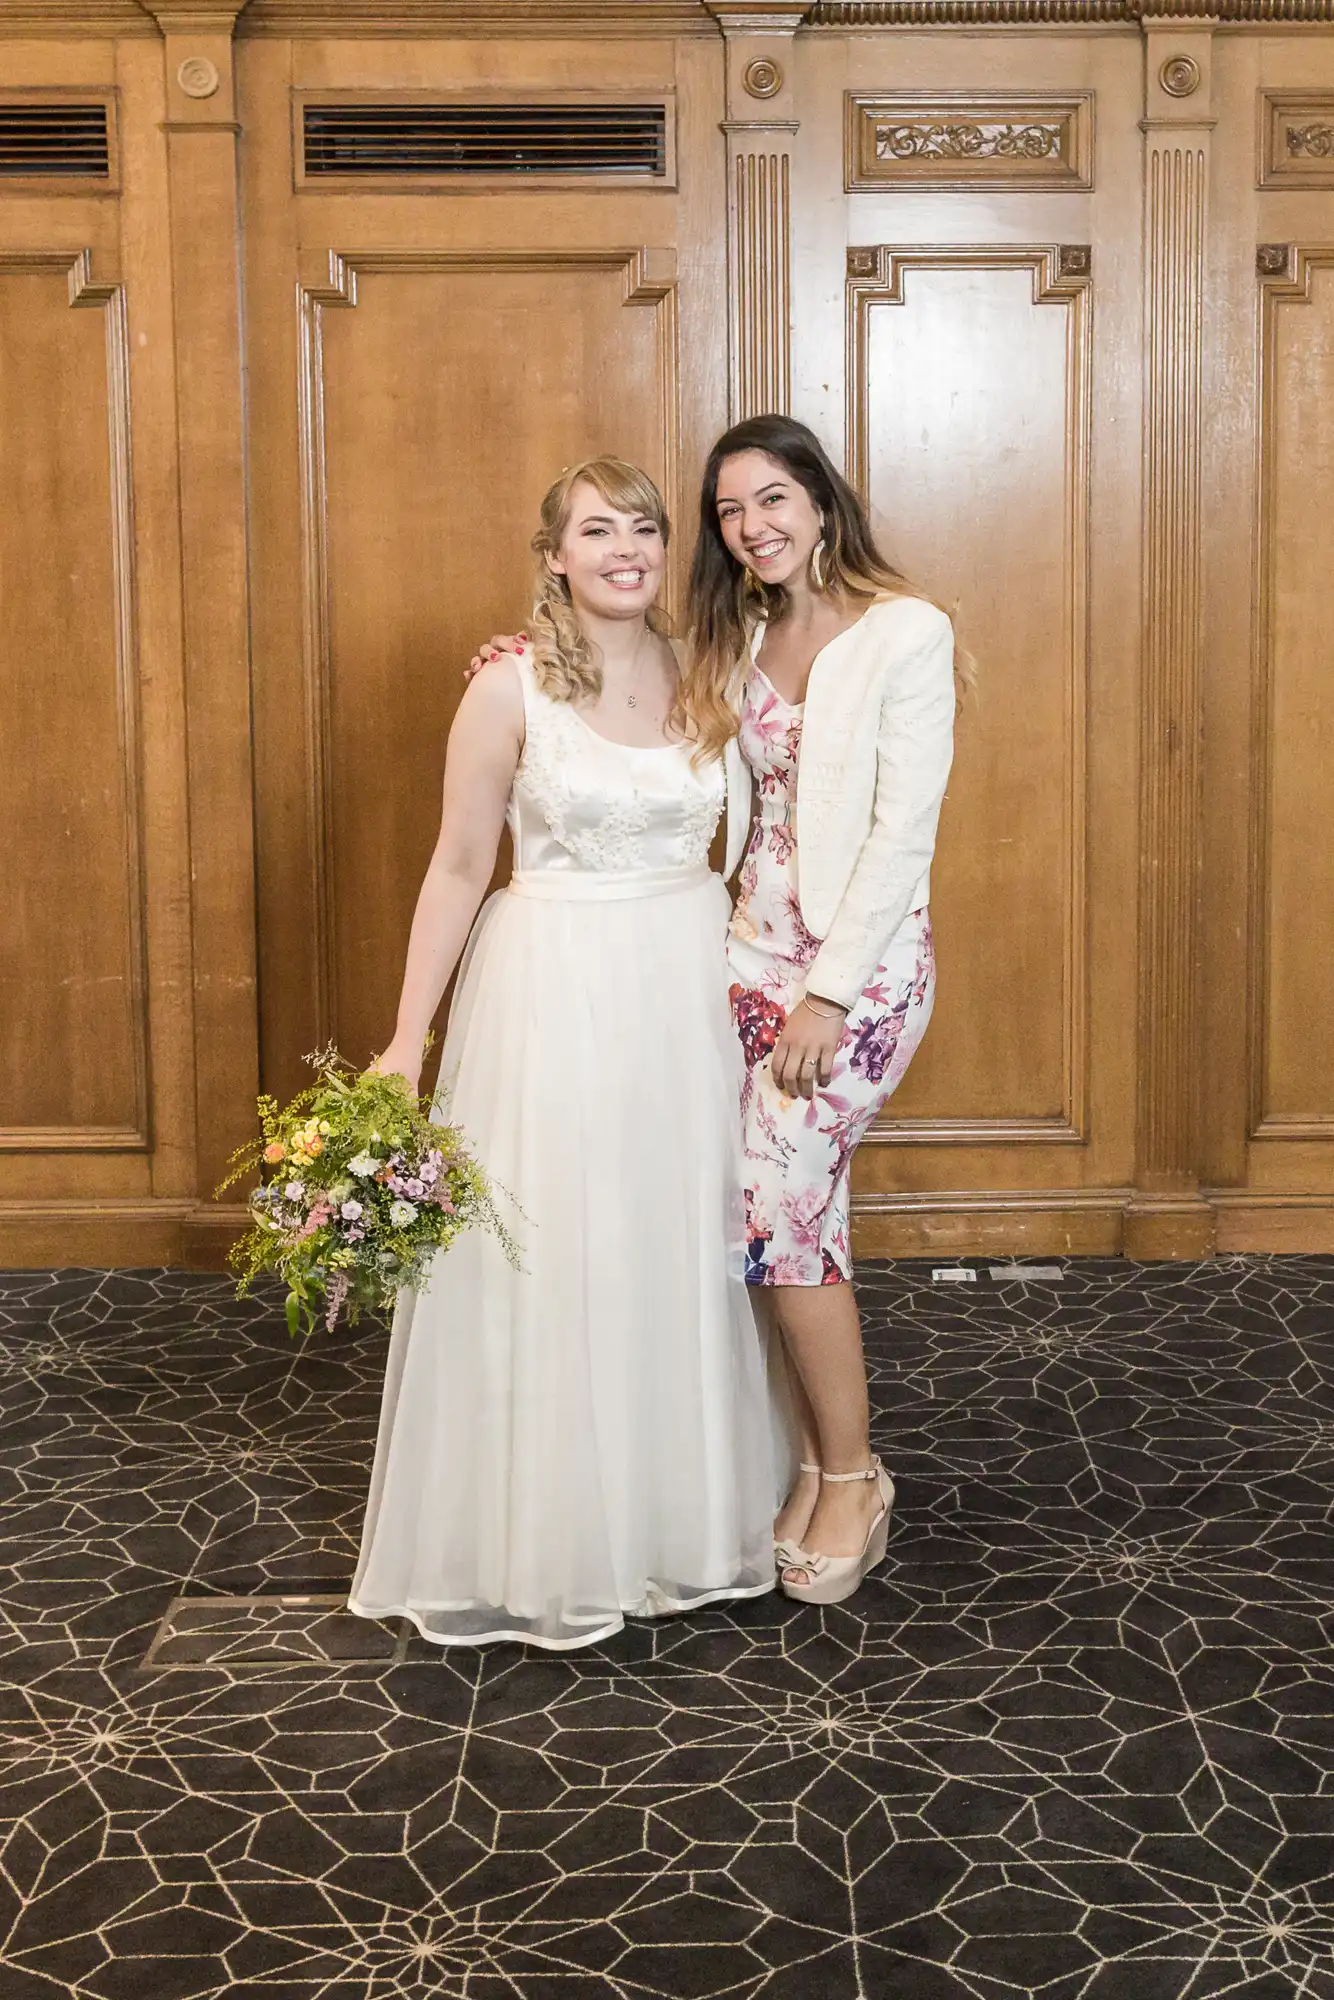 Two women smiling in a formal setting, one in a white wedding dress holding a bouquet and the other in a floral dress with a blazer.